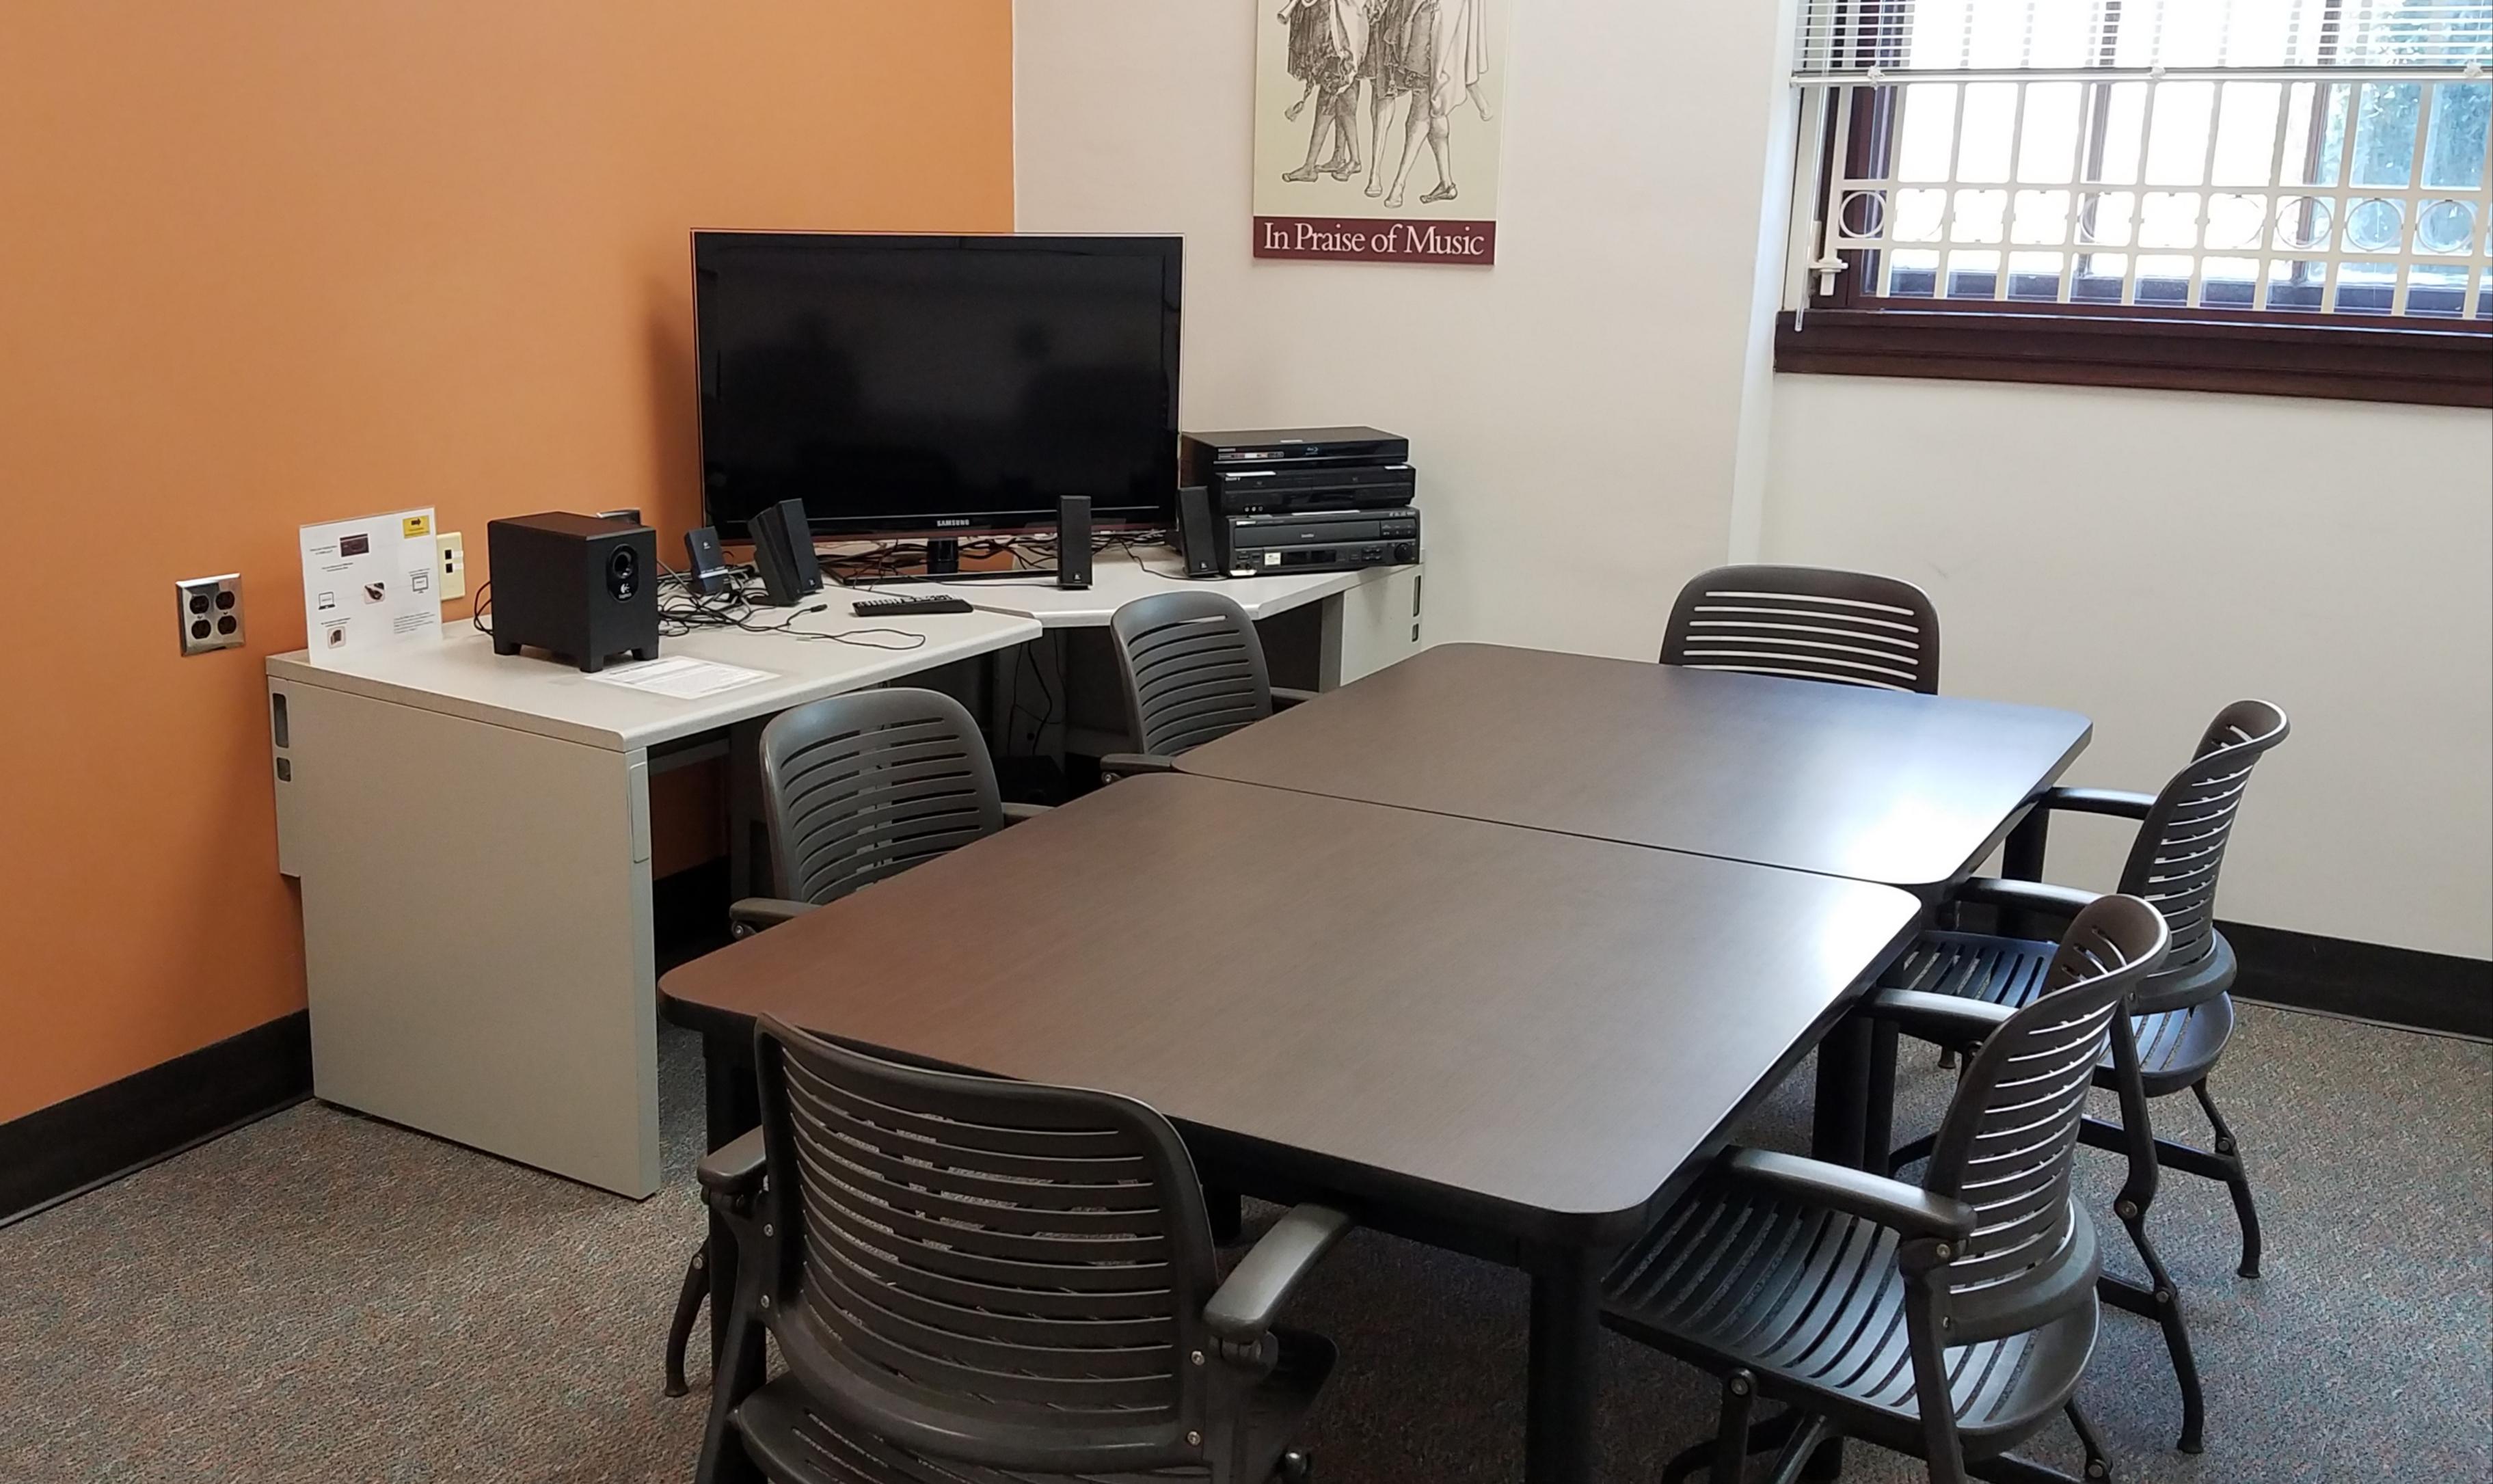 This room has a study table with six seats, and a separate desk with a large TV and AV equipment.